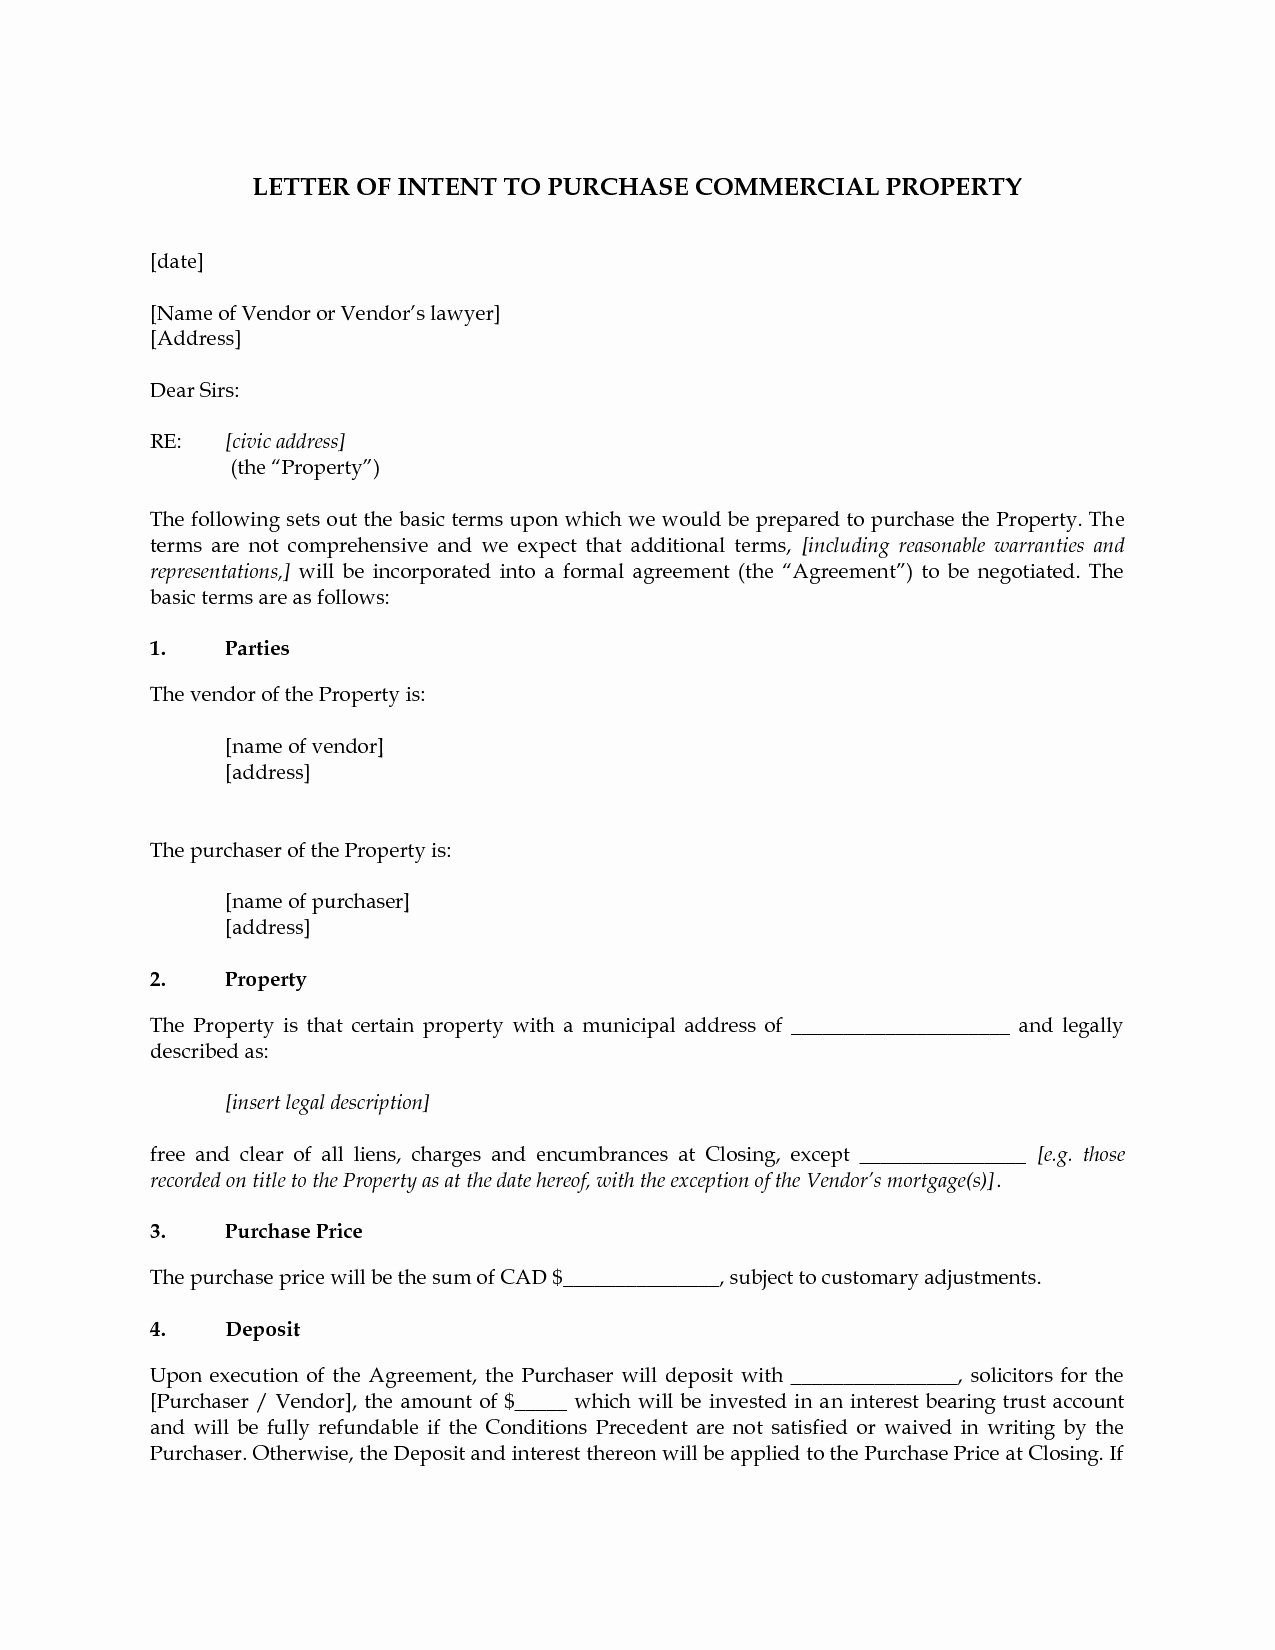 Commercial Real Estate Loi Template Best Of Mercial Real Estate Letter Intent to Purchase